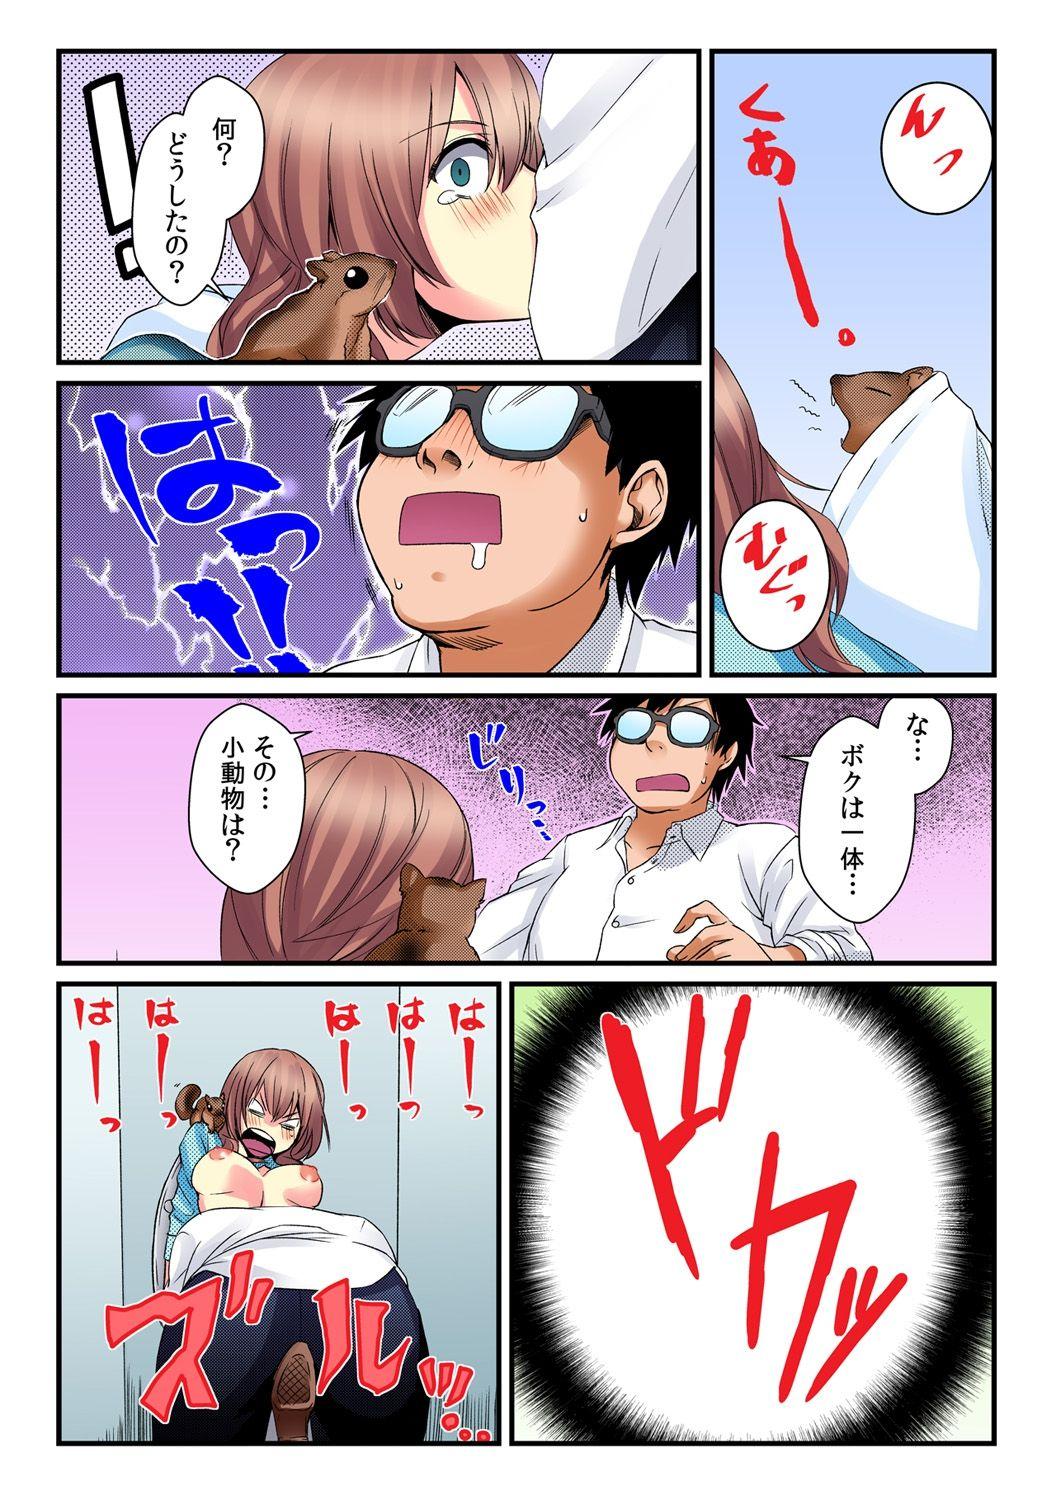 [Akagi Gijou / Akahige] I became a girl- and I definitely can't let anyone find out! (Full color) 2 26